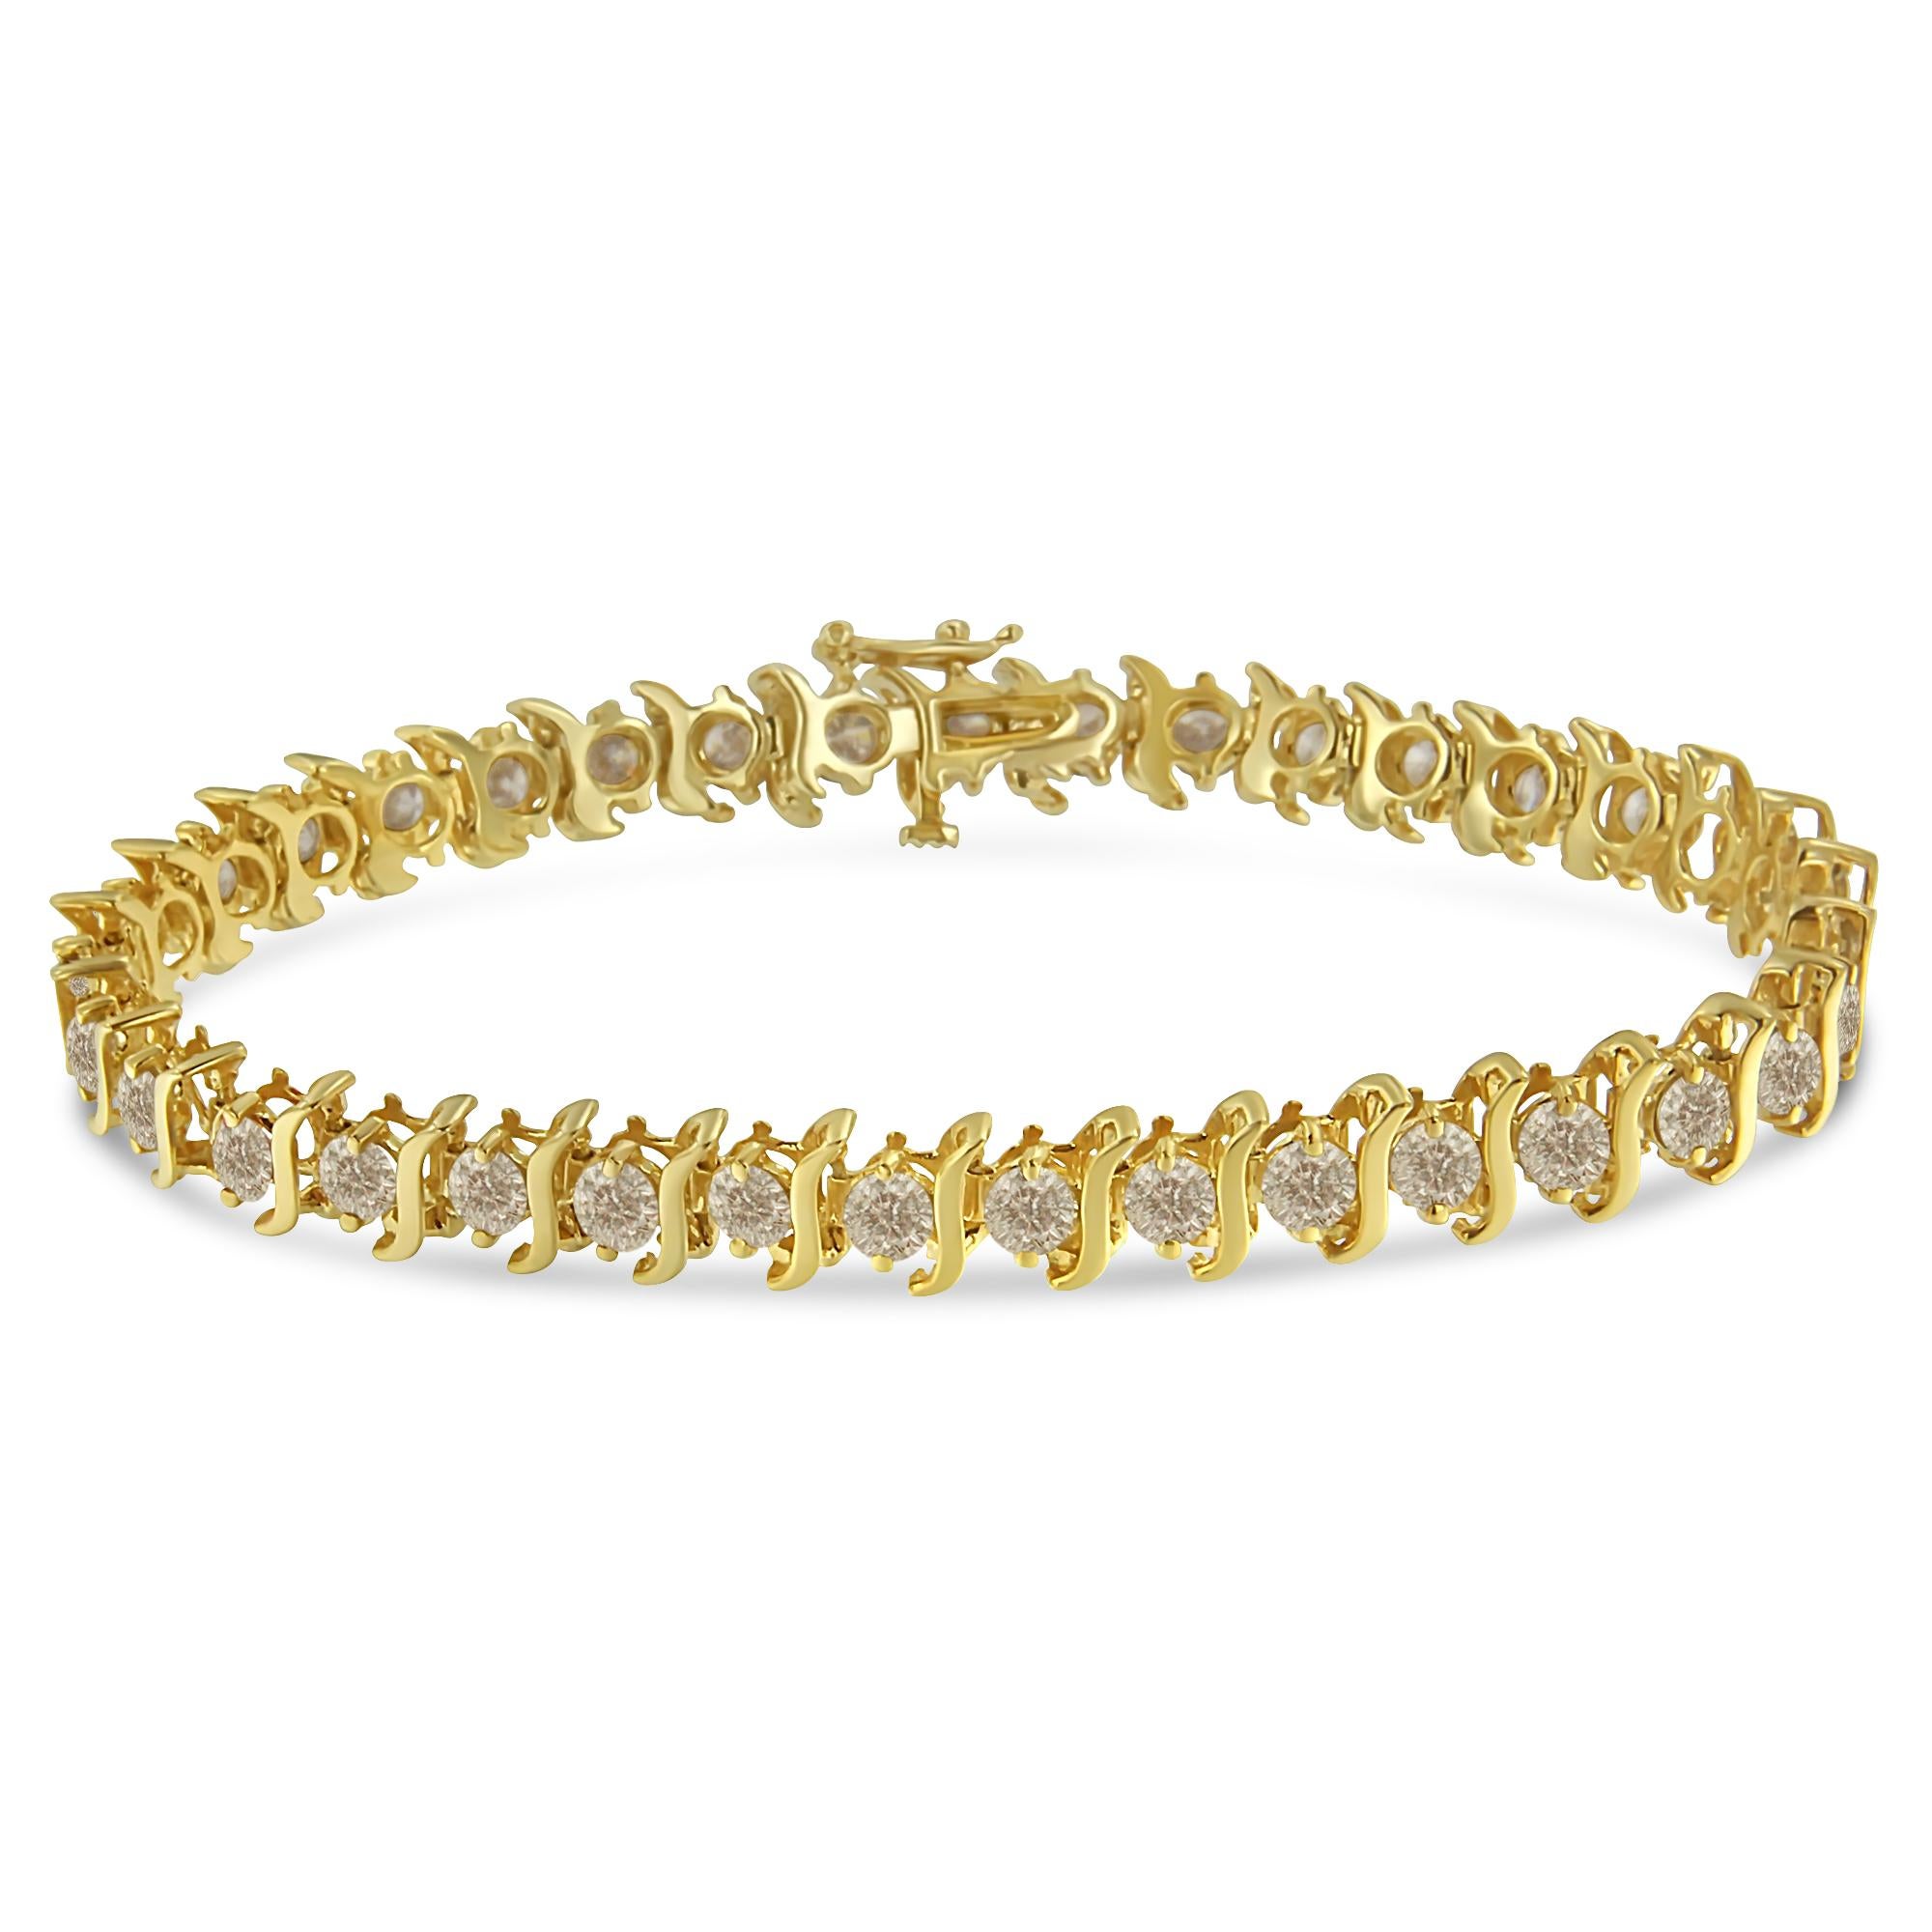 Elegantly crafted from 10kt yellow gold plated .925 sterling silver, this shimmering tennis bracelet has a dazzling design, rife with 7 carats of sparkling round brilliant-cut white diamonds. The brilliant bracelet features an alternating pattern of